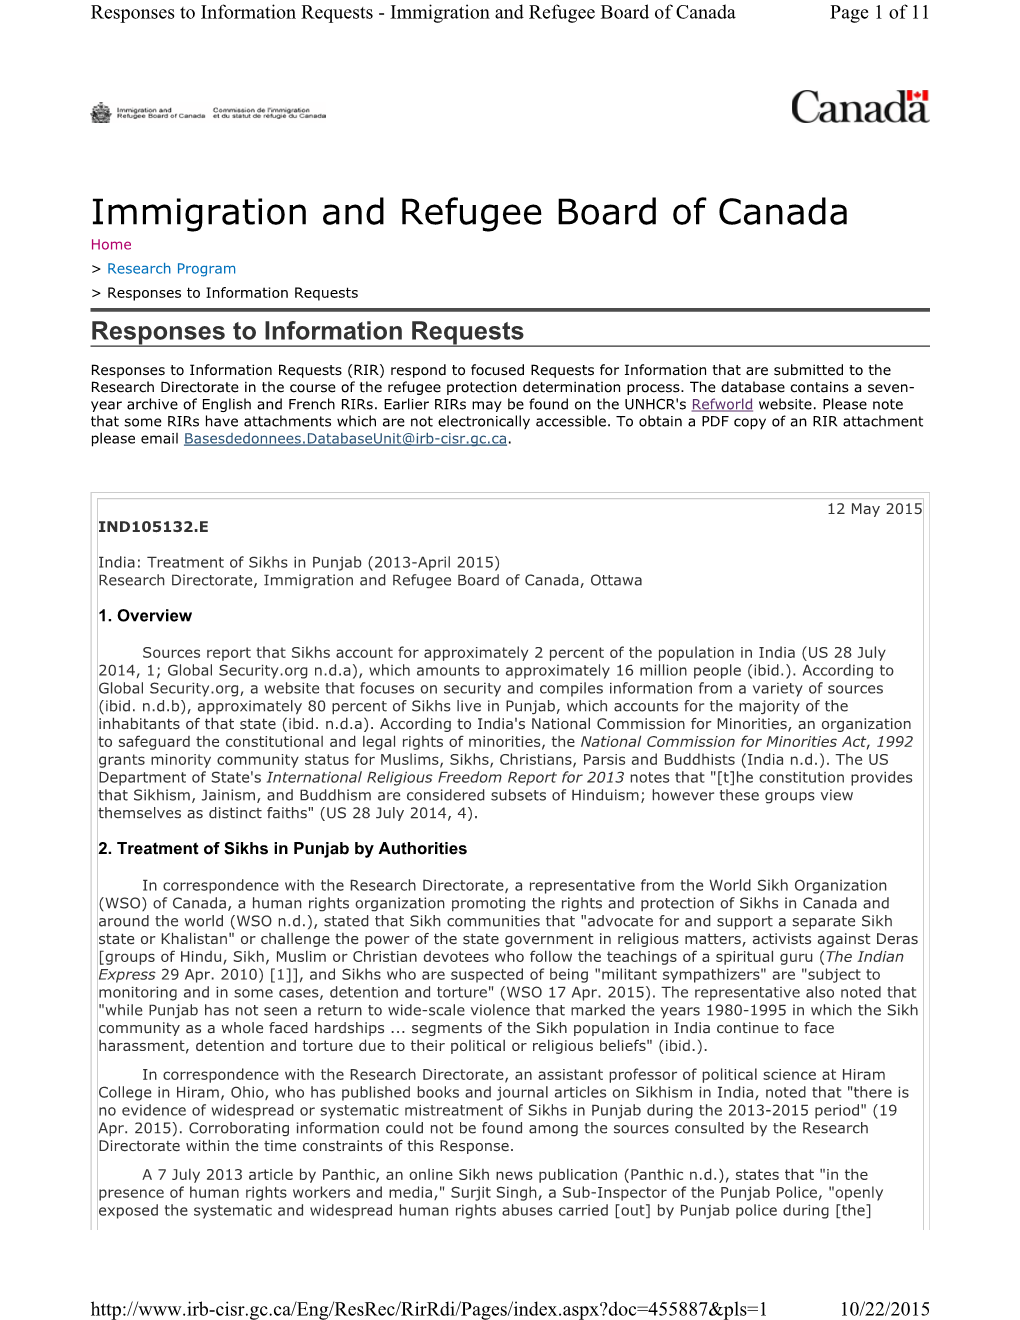 Treatment of Sikhs in Punjab (2013-April 2015) Research Directorate, Immigration and Refugee Board of Canada, Ottawa